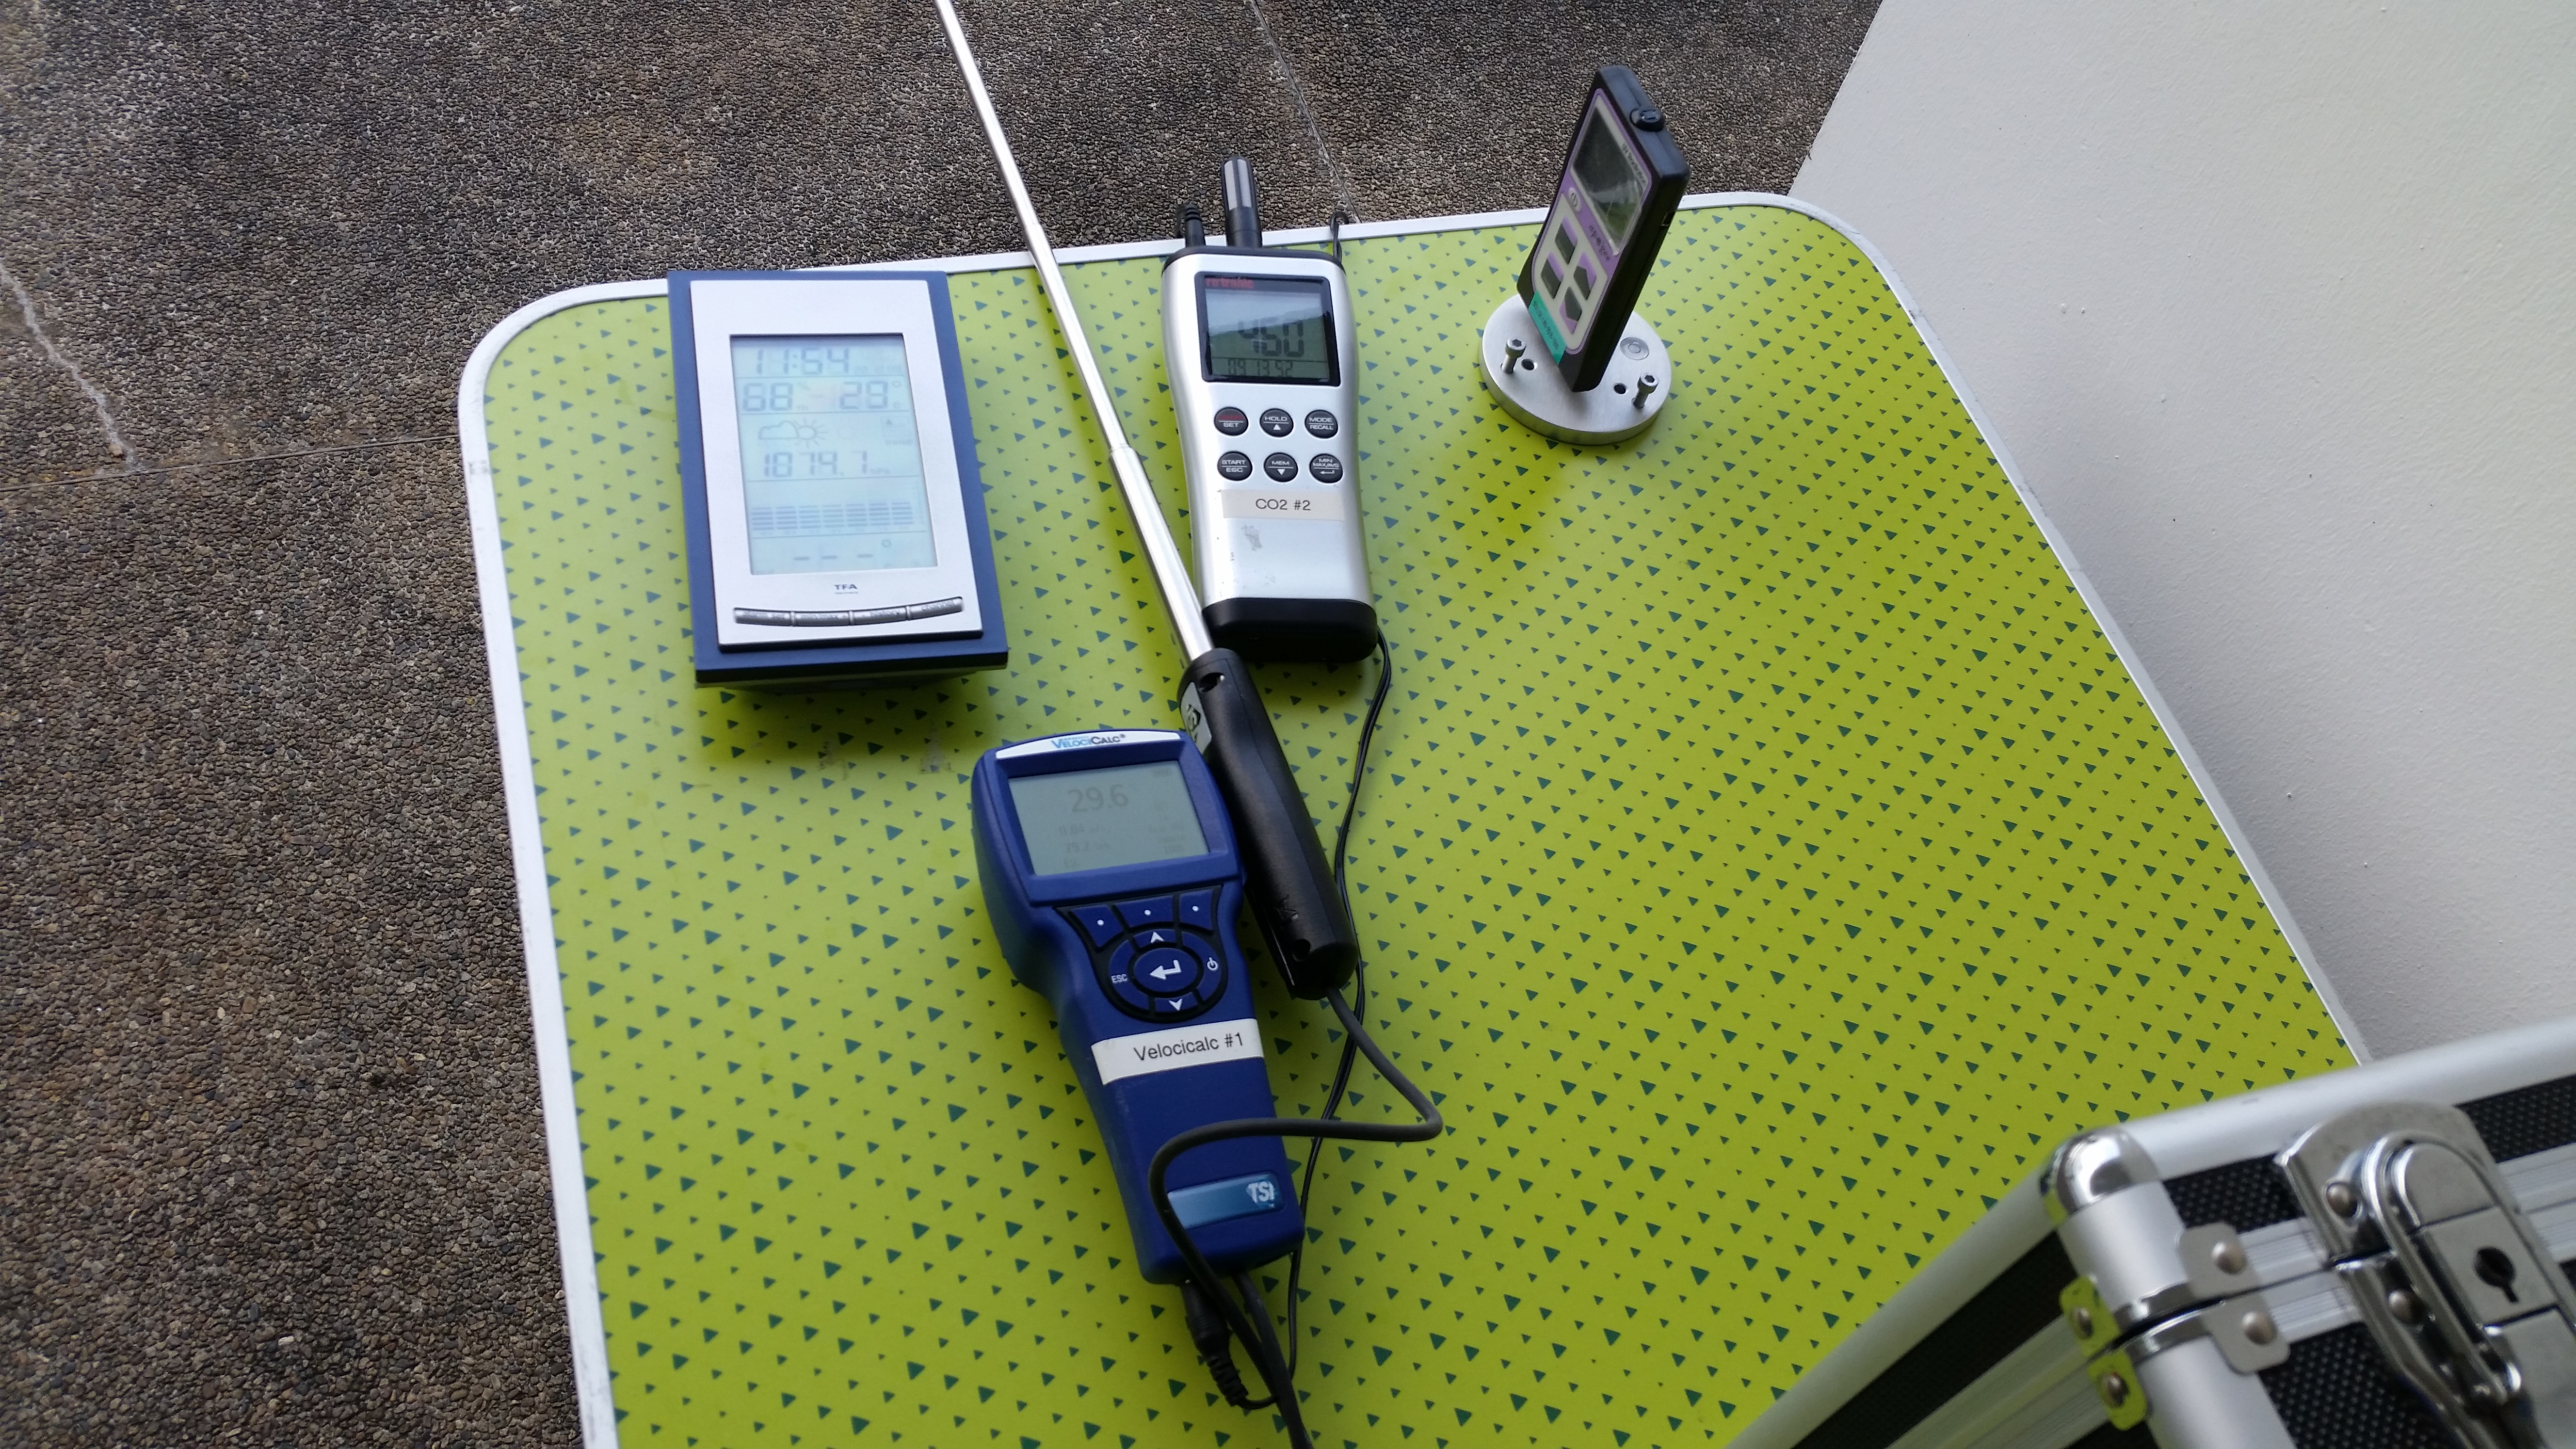 A collection of 4 handheld sensors on top of a green picnic table located at a balcony at NTU